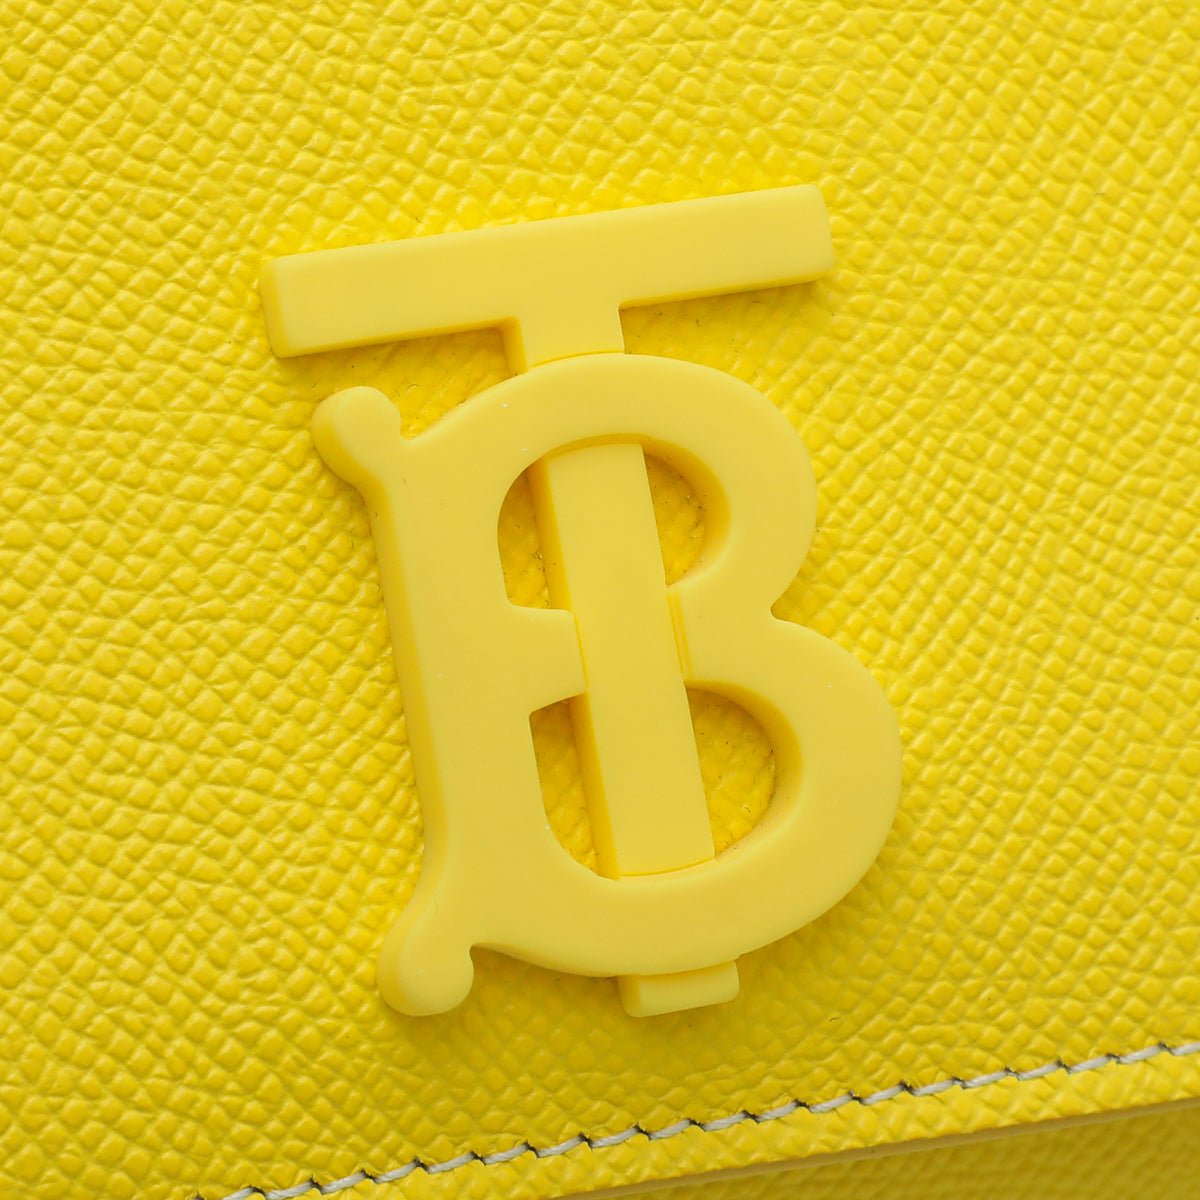 Load image into Gallery viewer, Burberry - Burberry Yellow TB Logo Teddy Belt Bag | The Closet
